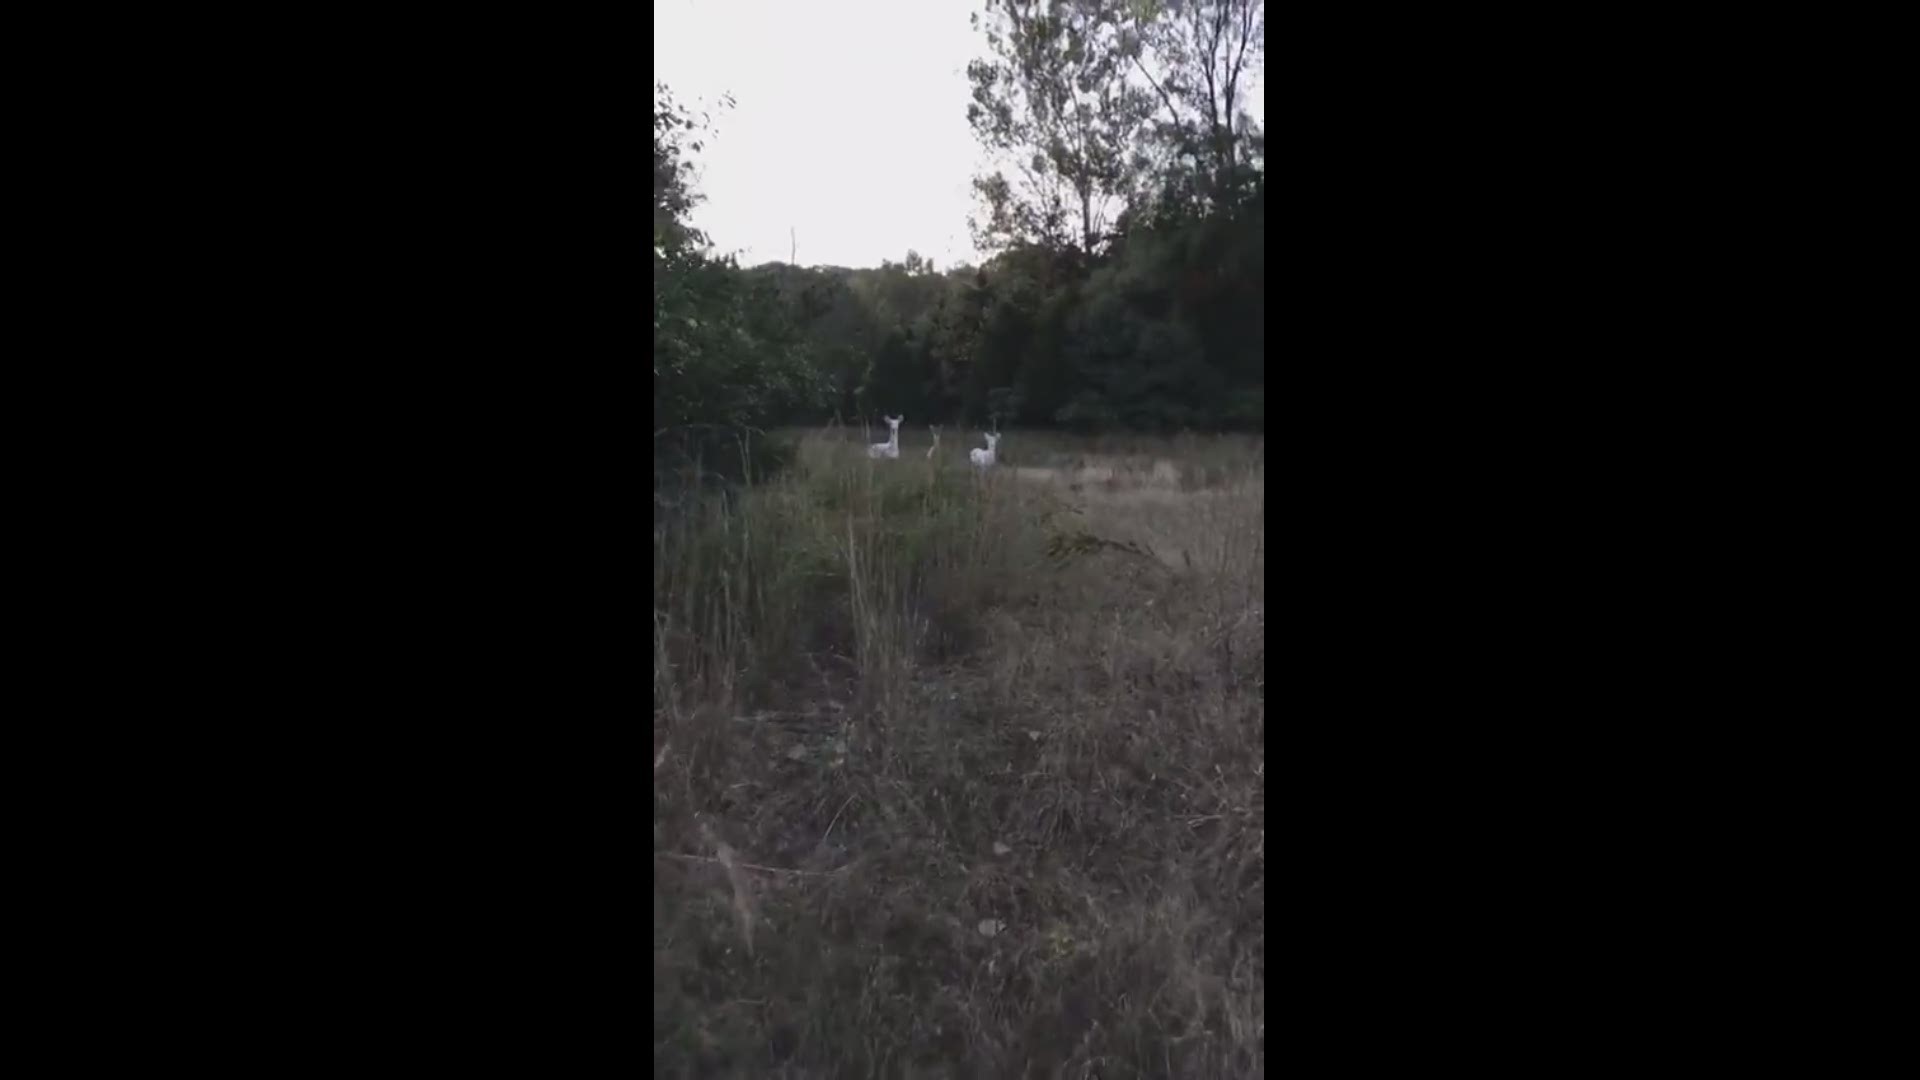 A Wildwood couple spotted two rare albino deer, and their video of the majestic creatures is picking up attention on social media.